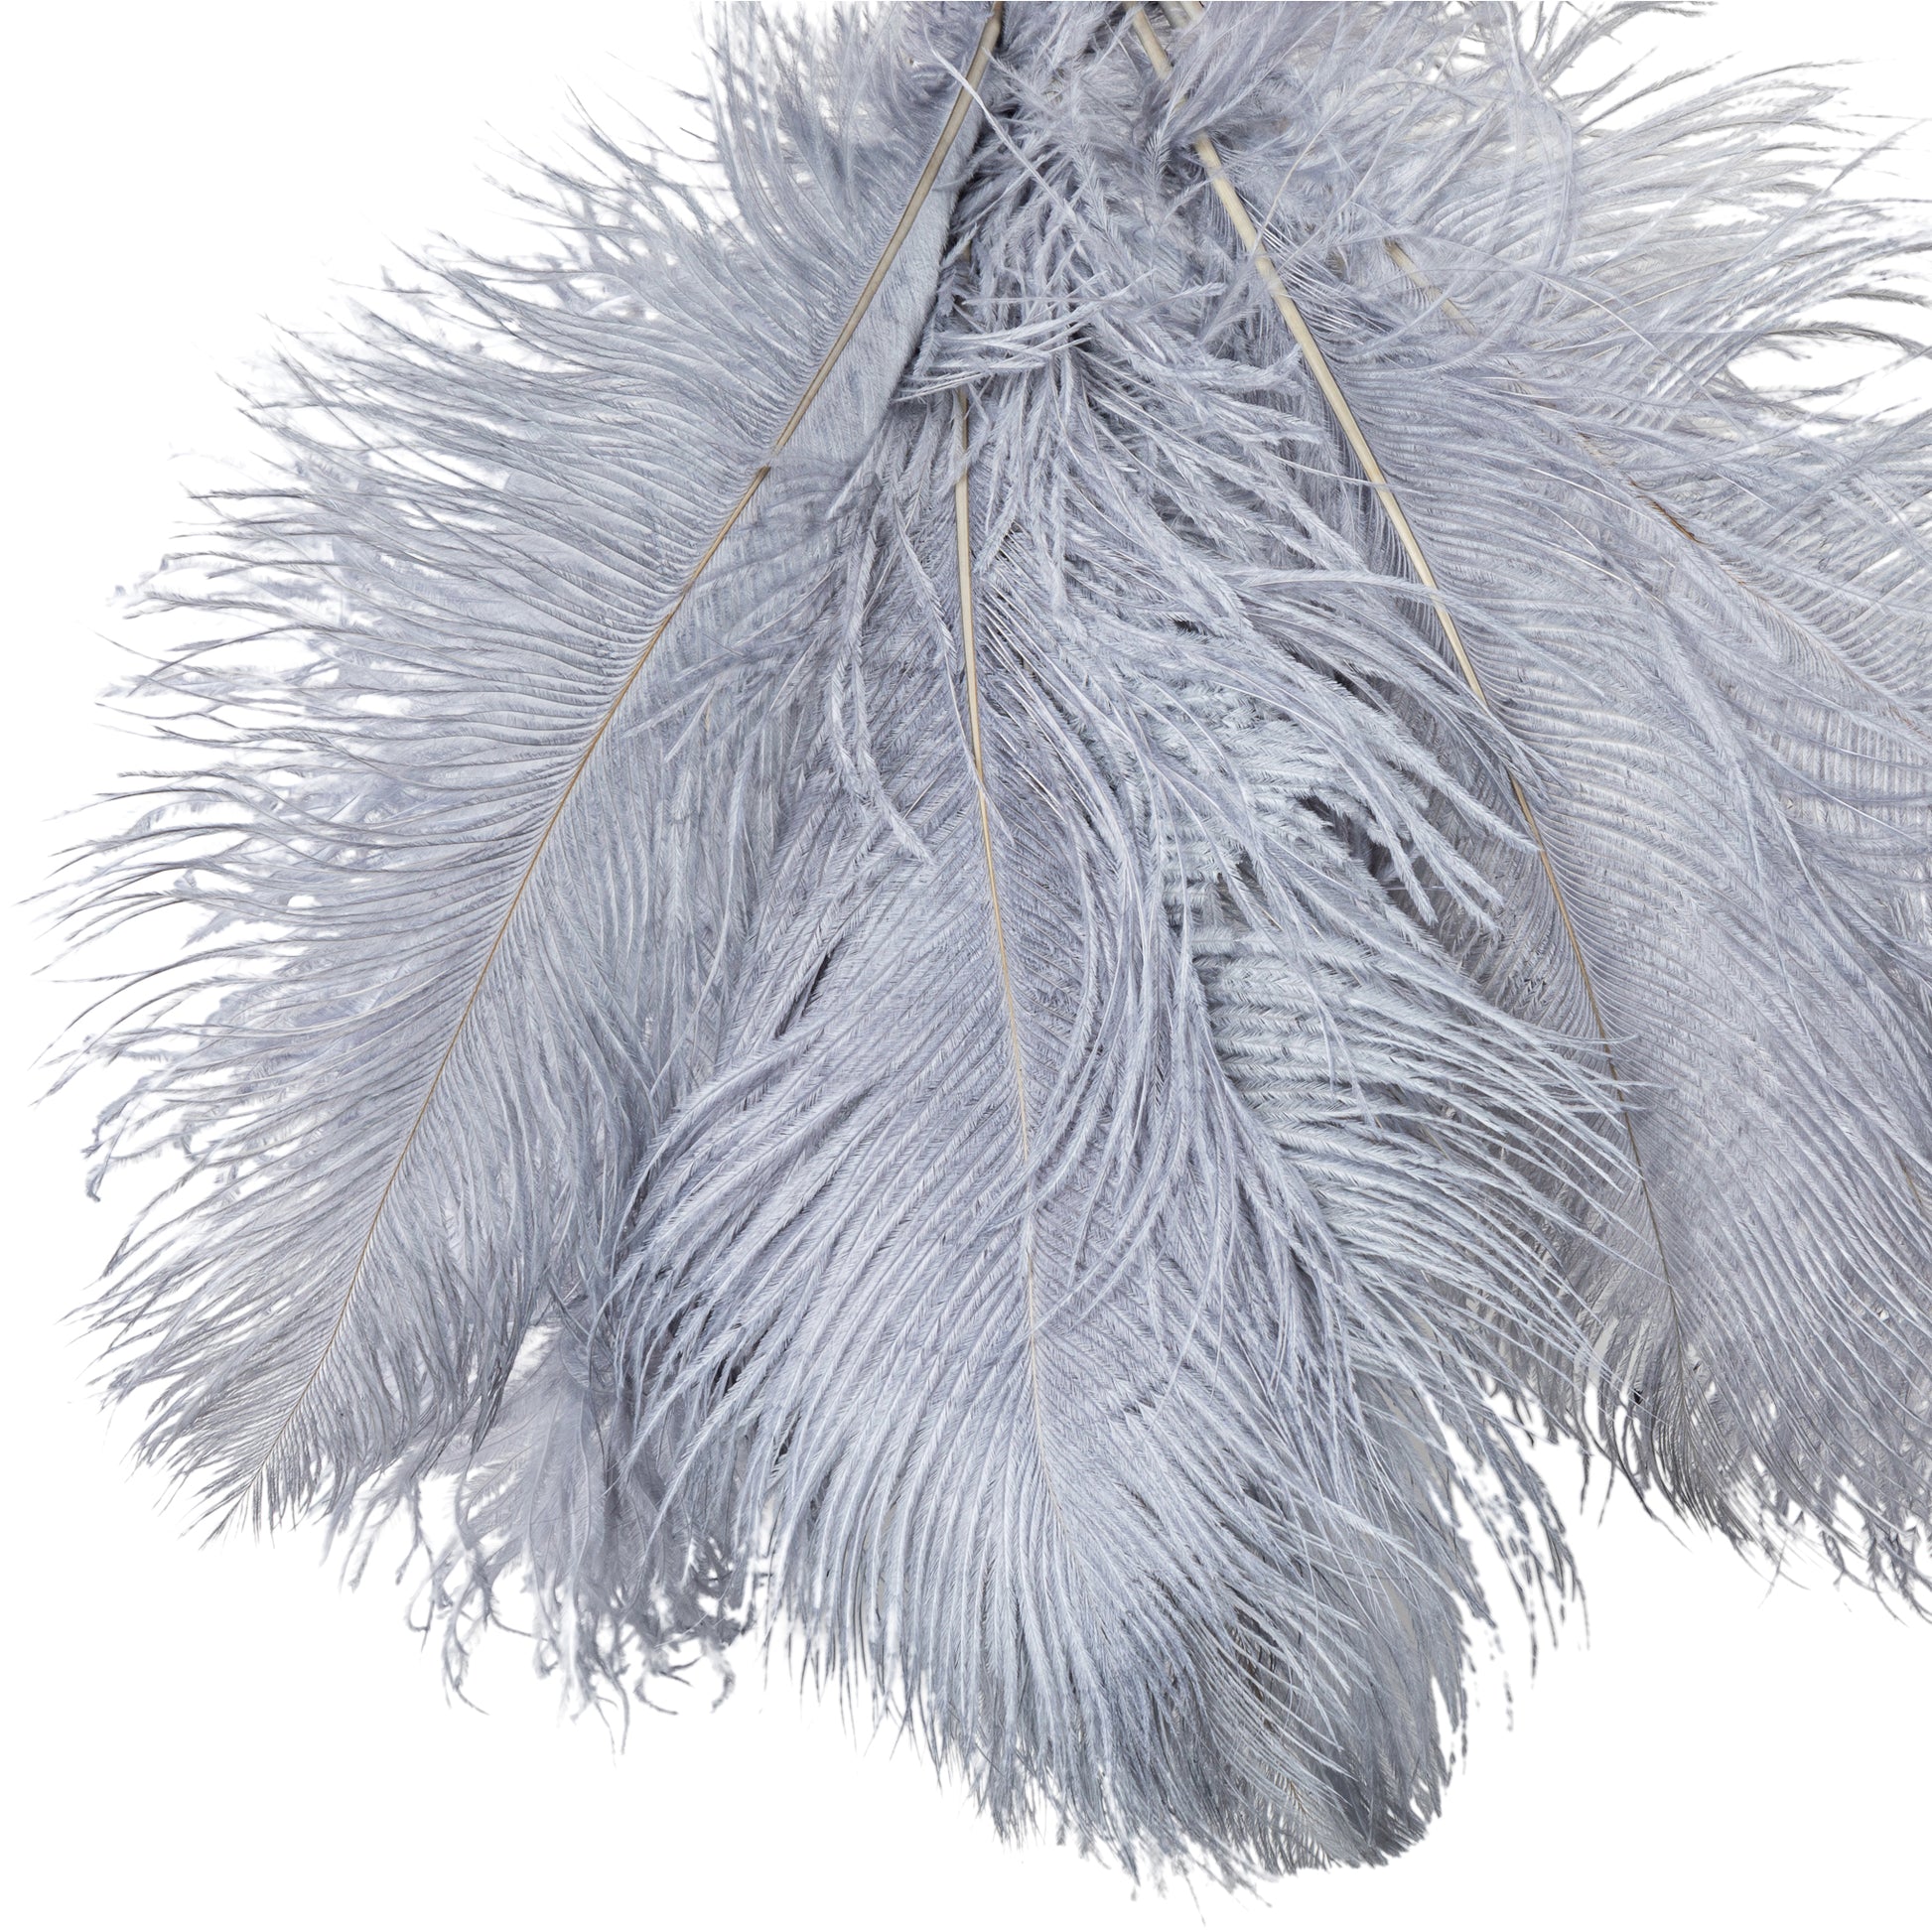 Unger Ostrich Feather Duster, 18